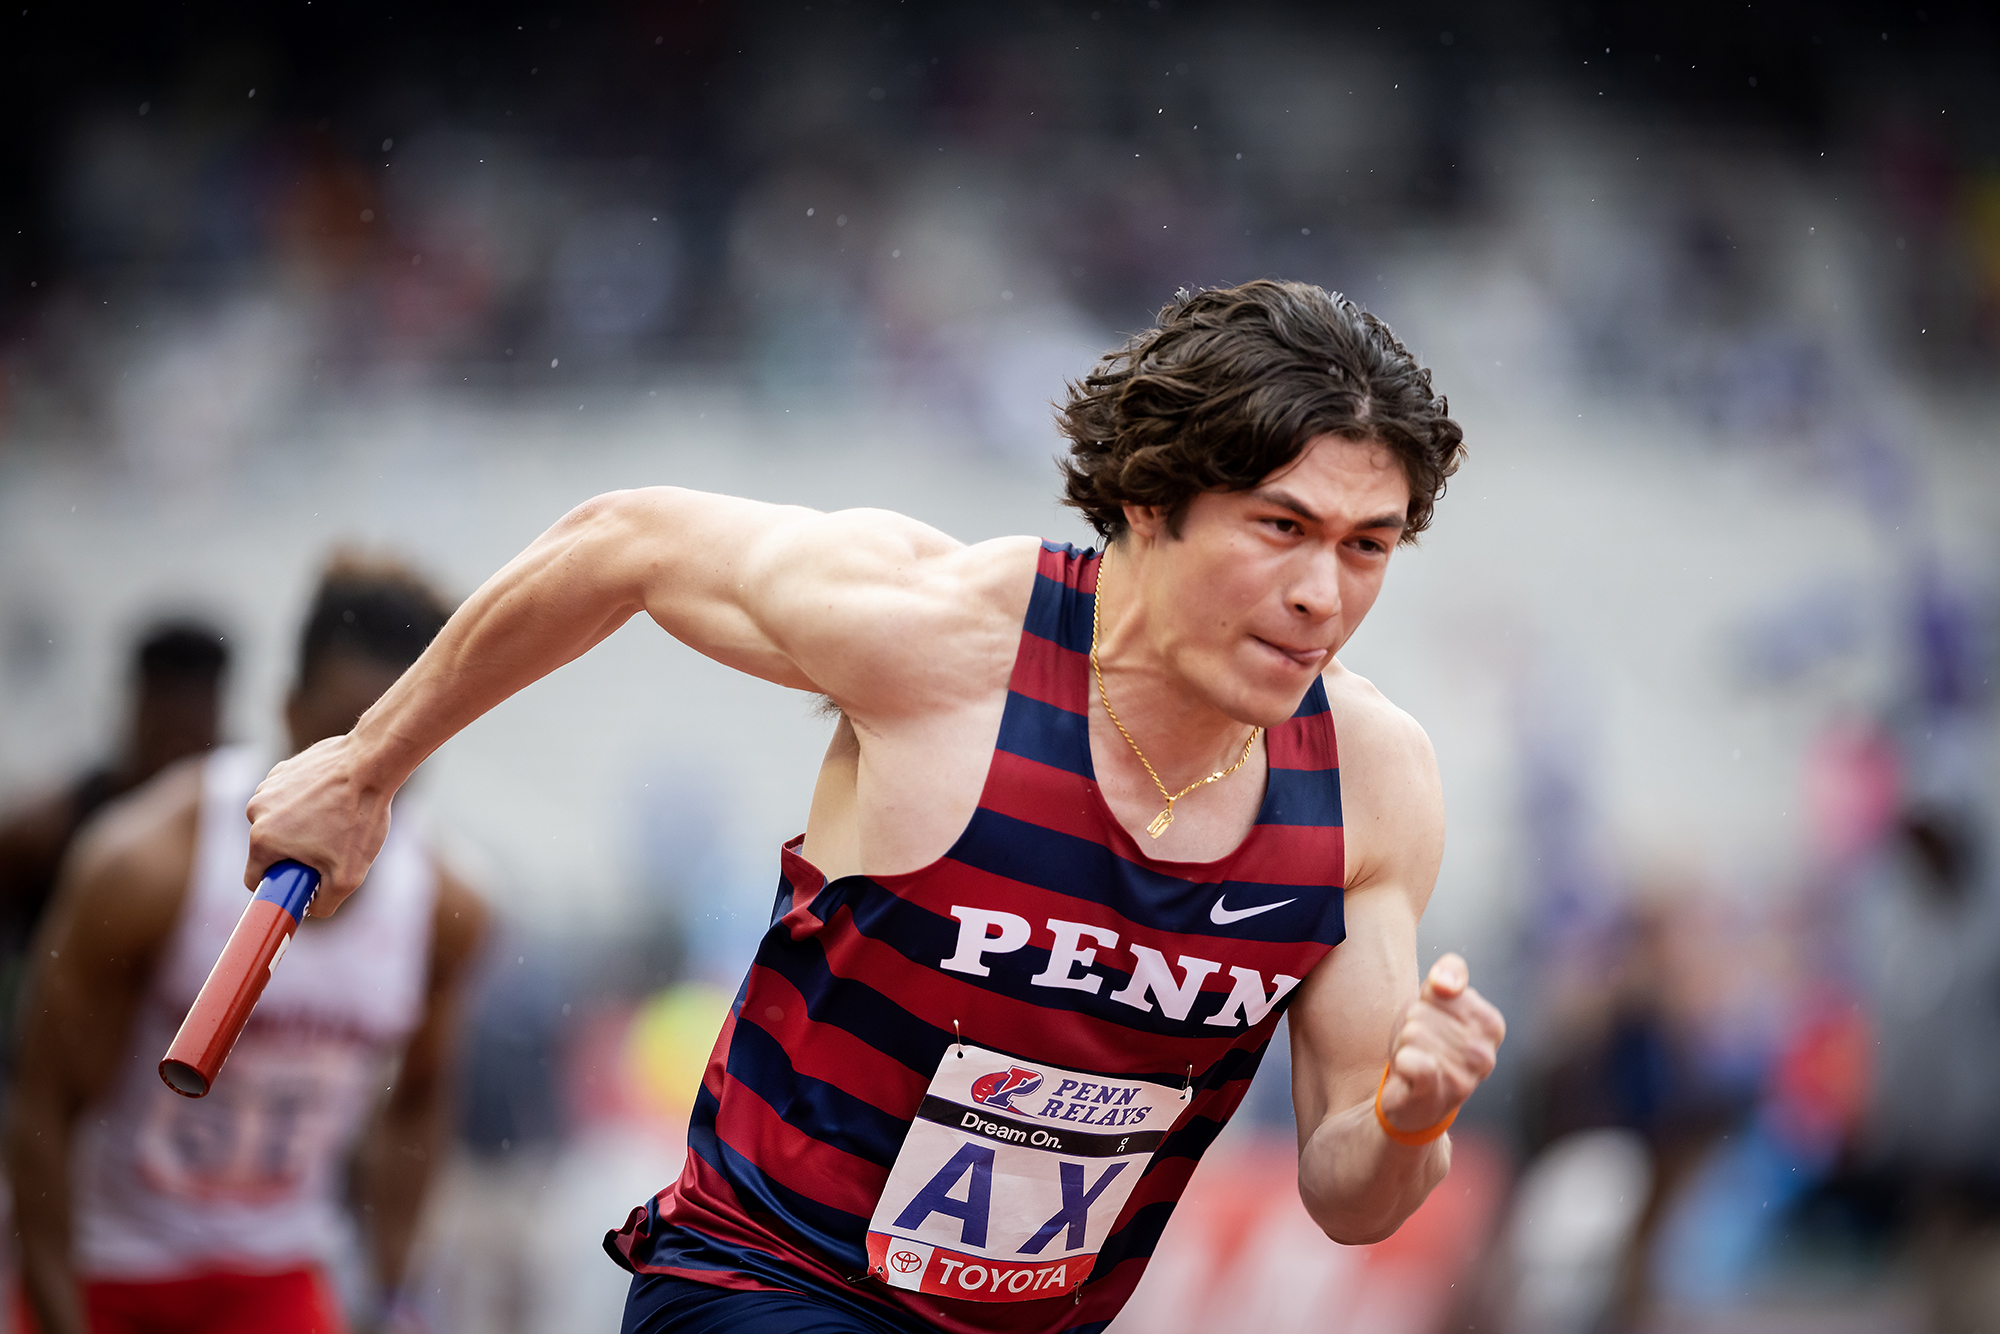 John Ruvo IV, a first-year sprinter from Scottsdale, Arizona, competes in the Penn Relays. Ruvo, first-year Shane Garnder, third-year Dimitri Nicholson, and second-year Aaron Stillitano placed fifth in the College Men’s 4x100 on Saturday with a time of 41.28